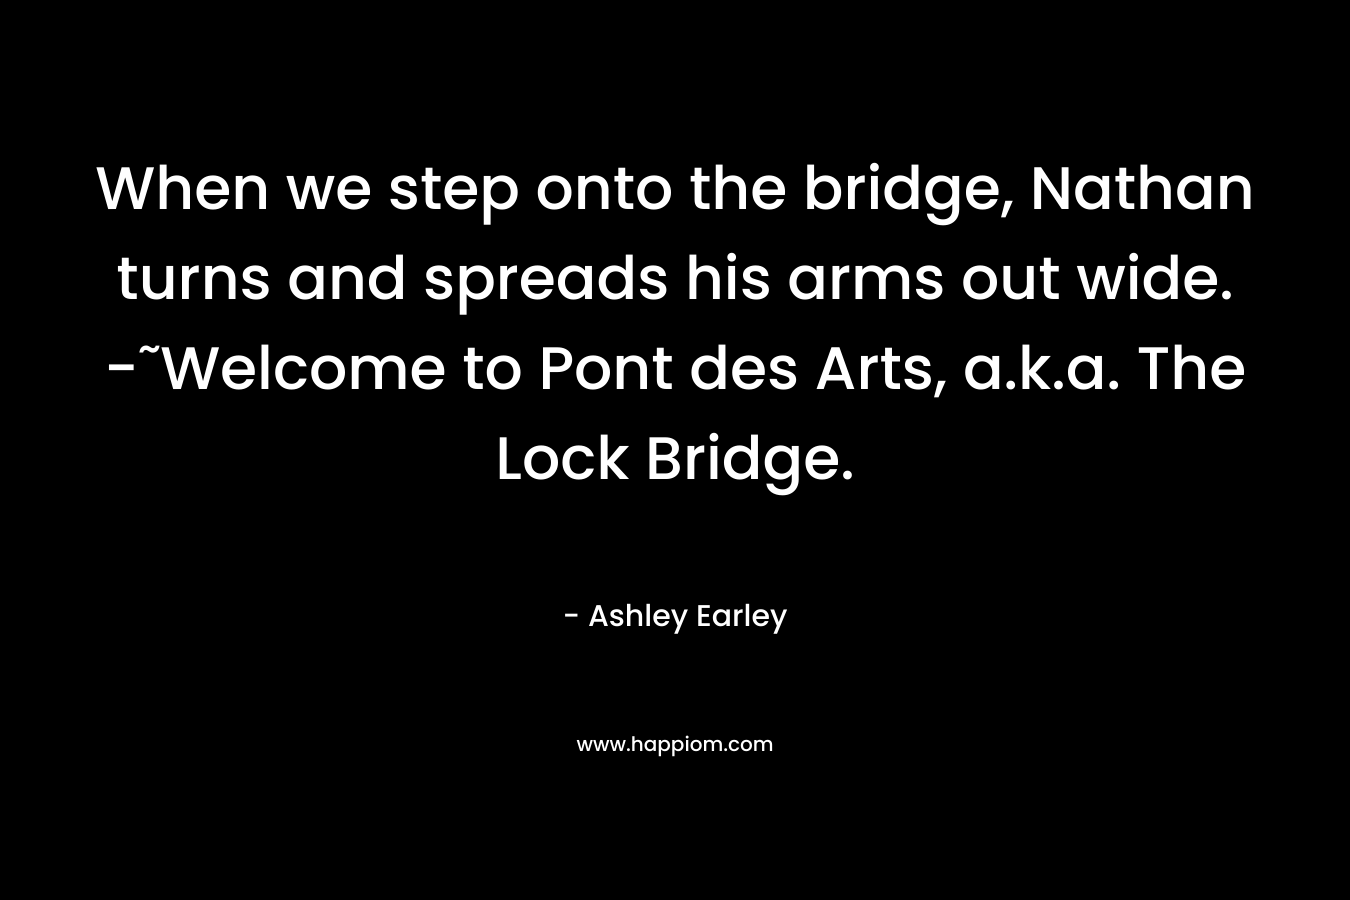 When we step onto the bridge, Nathan turns and spreads his arms out wide. -˜Welcome to Pont des Arts, a.k.a. The Lock Bridge. – Ashley Earley